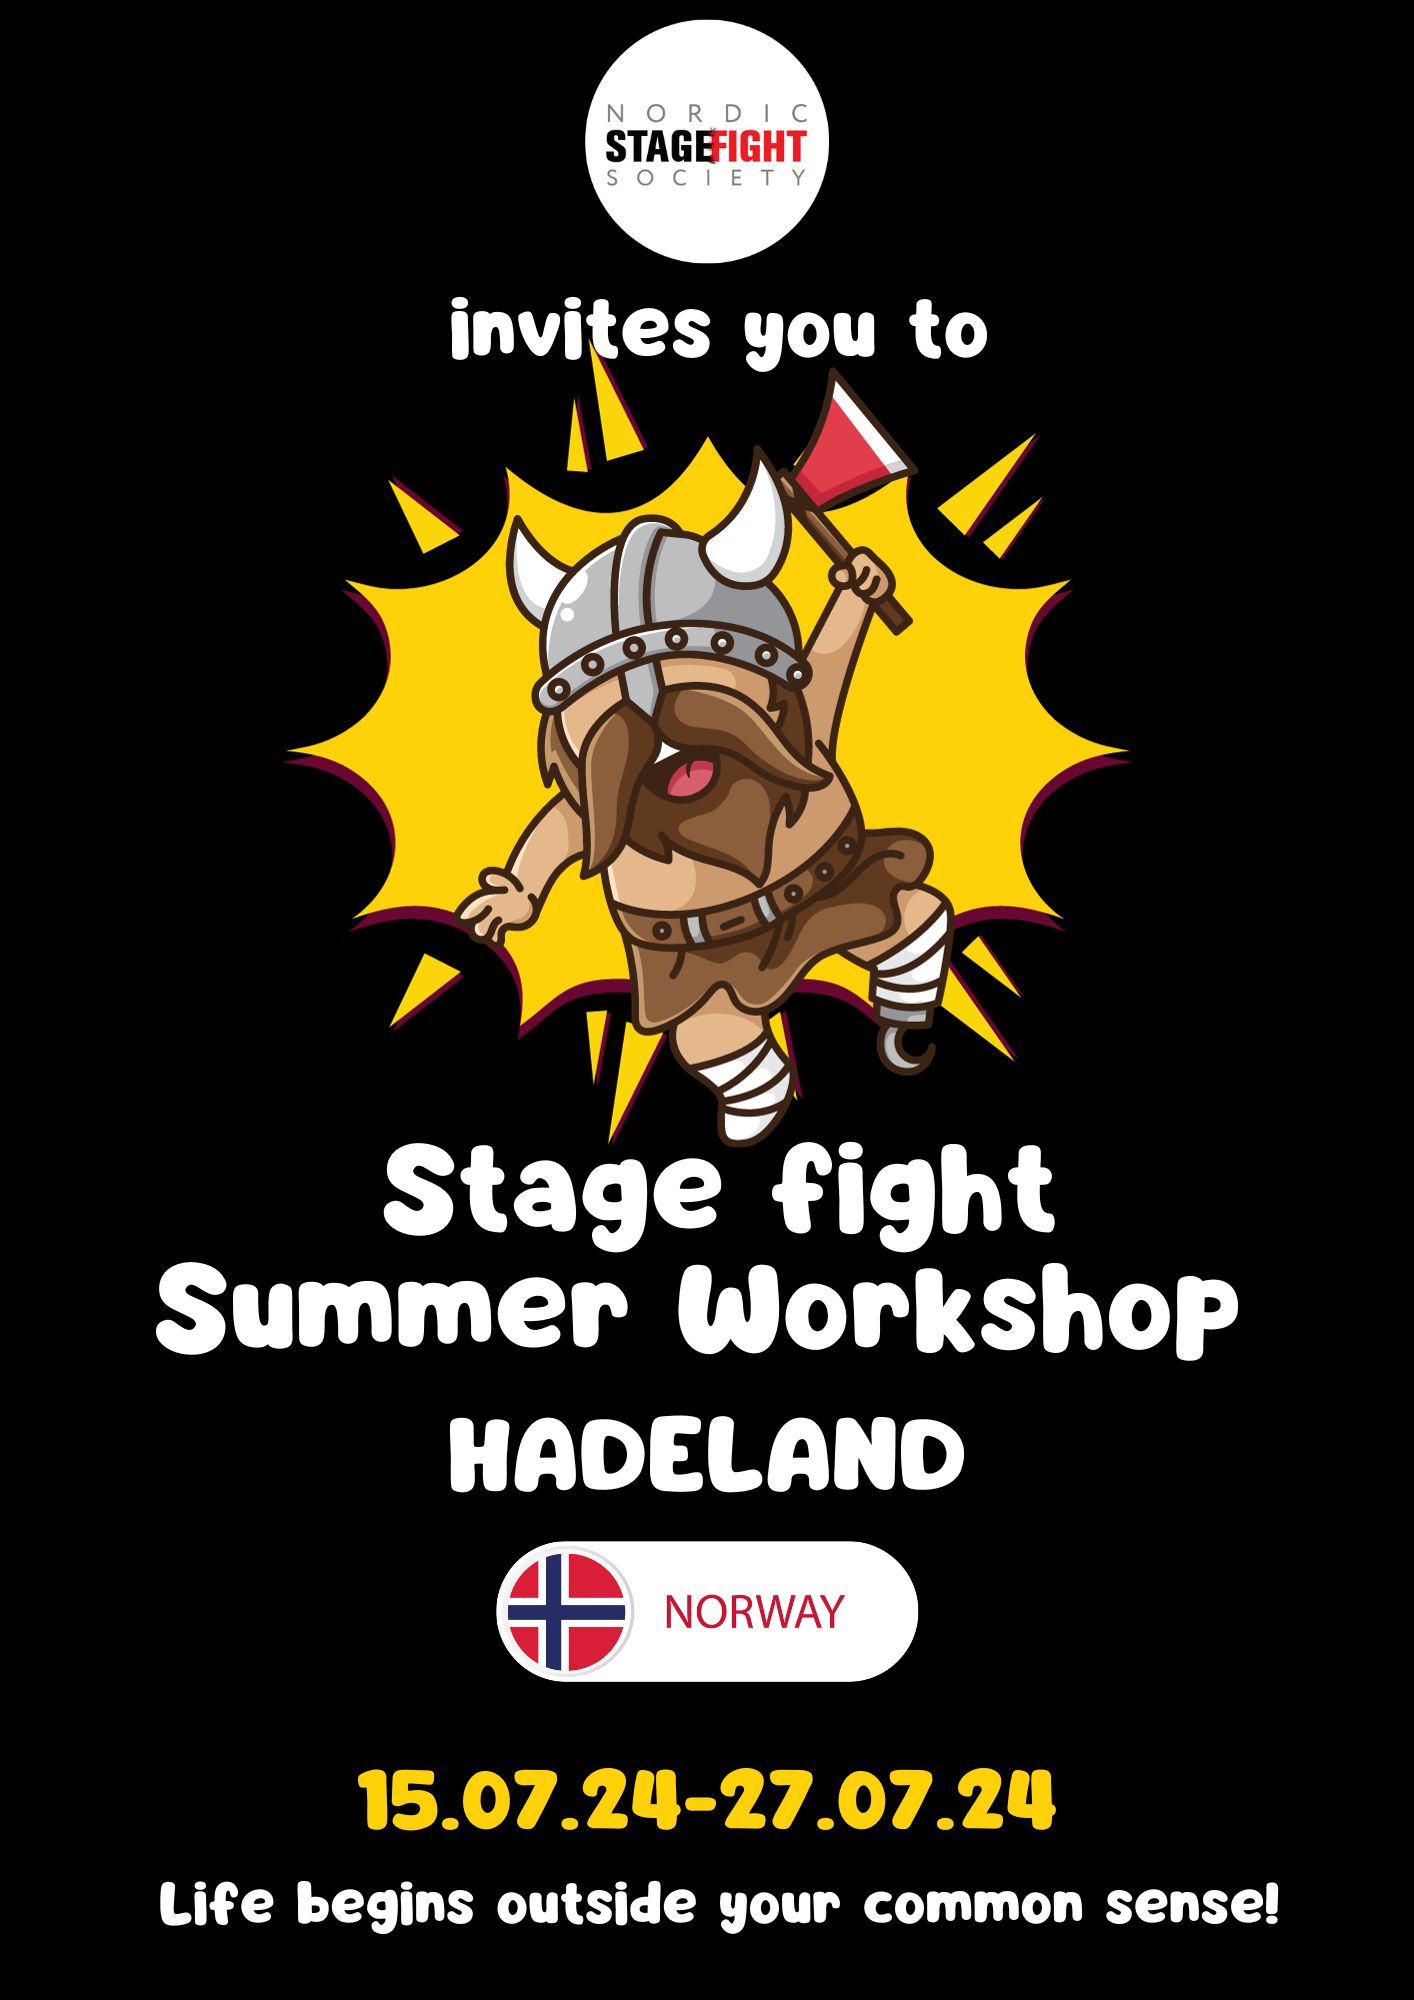 Picture of a chubby person (viking) with a brown kilt, no shirt, horned helmet, brown full beard and an axe in hand. The person stands in front of a large yellow explosion effect.<br />
Text around the viking Nordic Stage Fight Society invites you to Stage Fight Summer Workshop in Hadeland, Norway